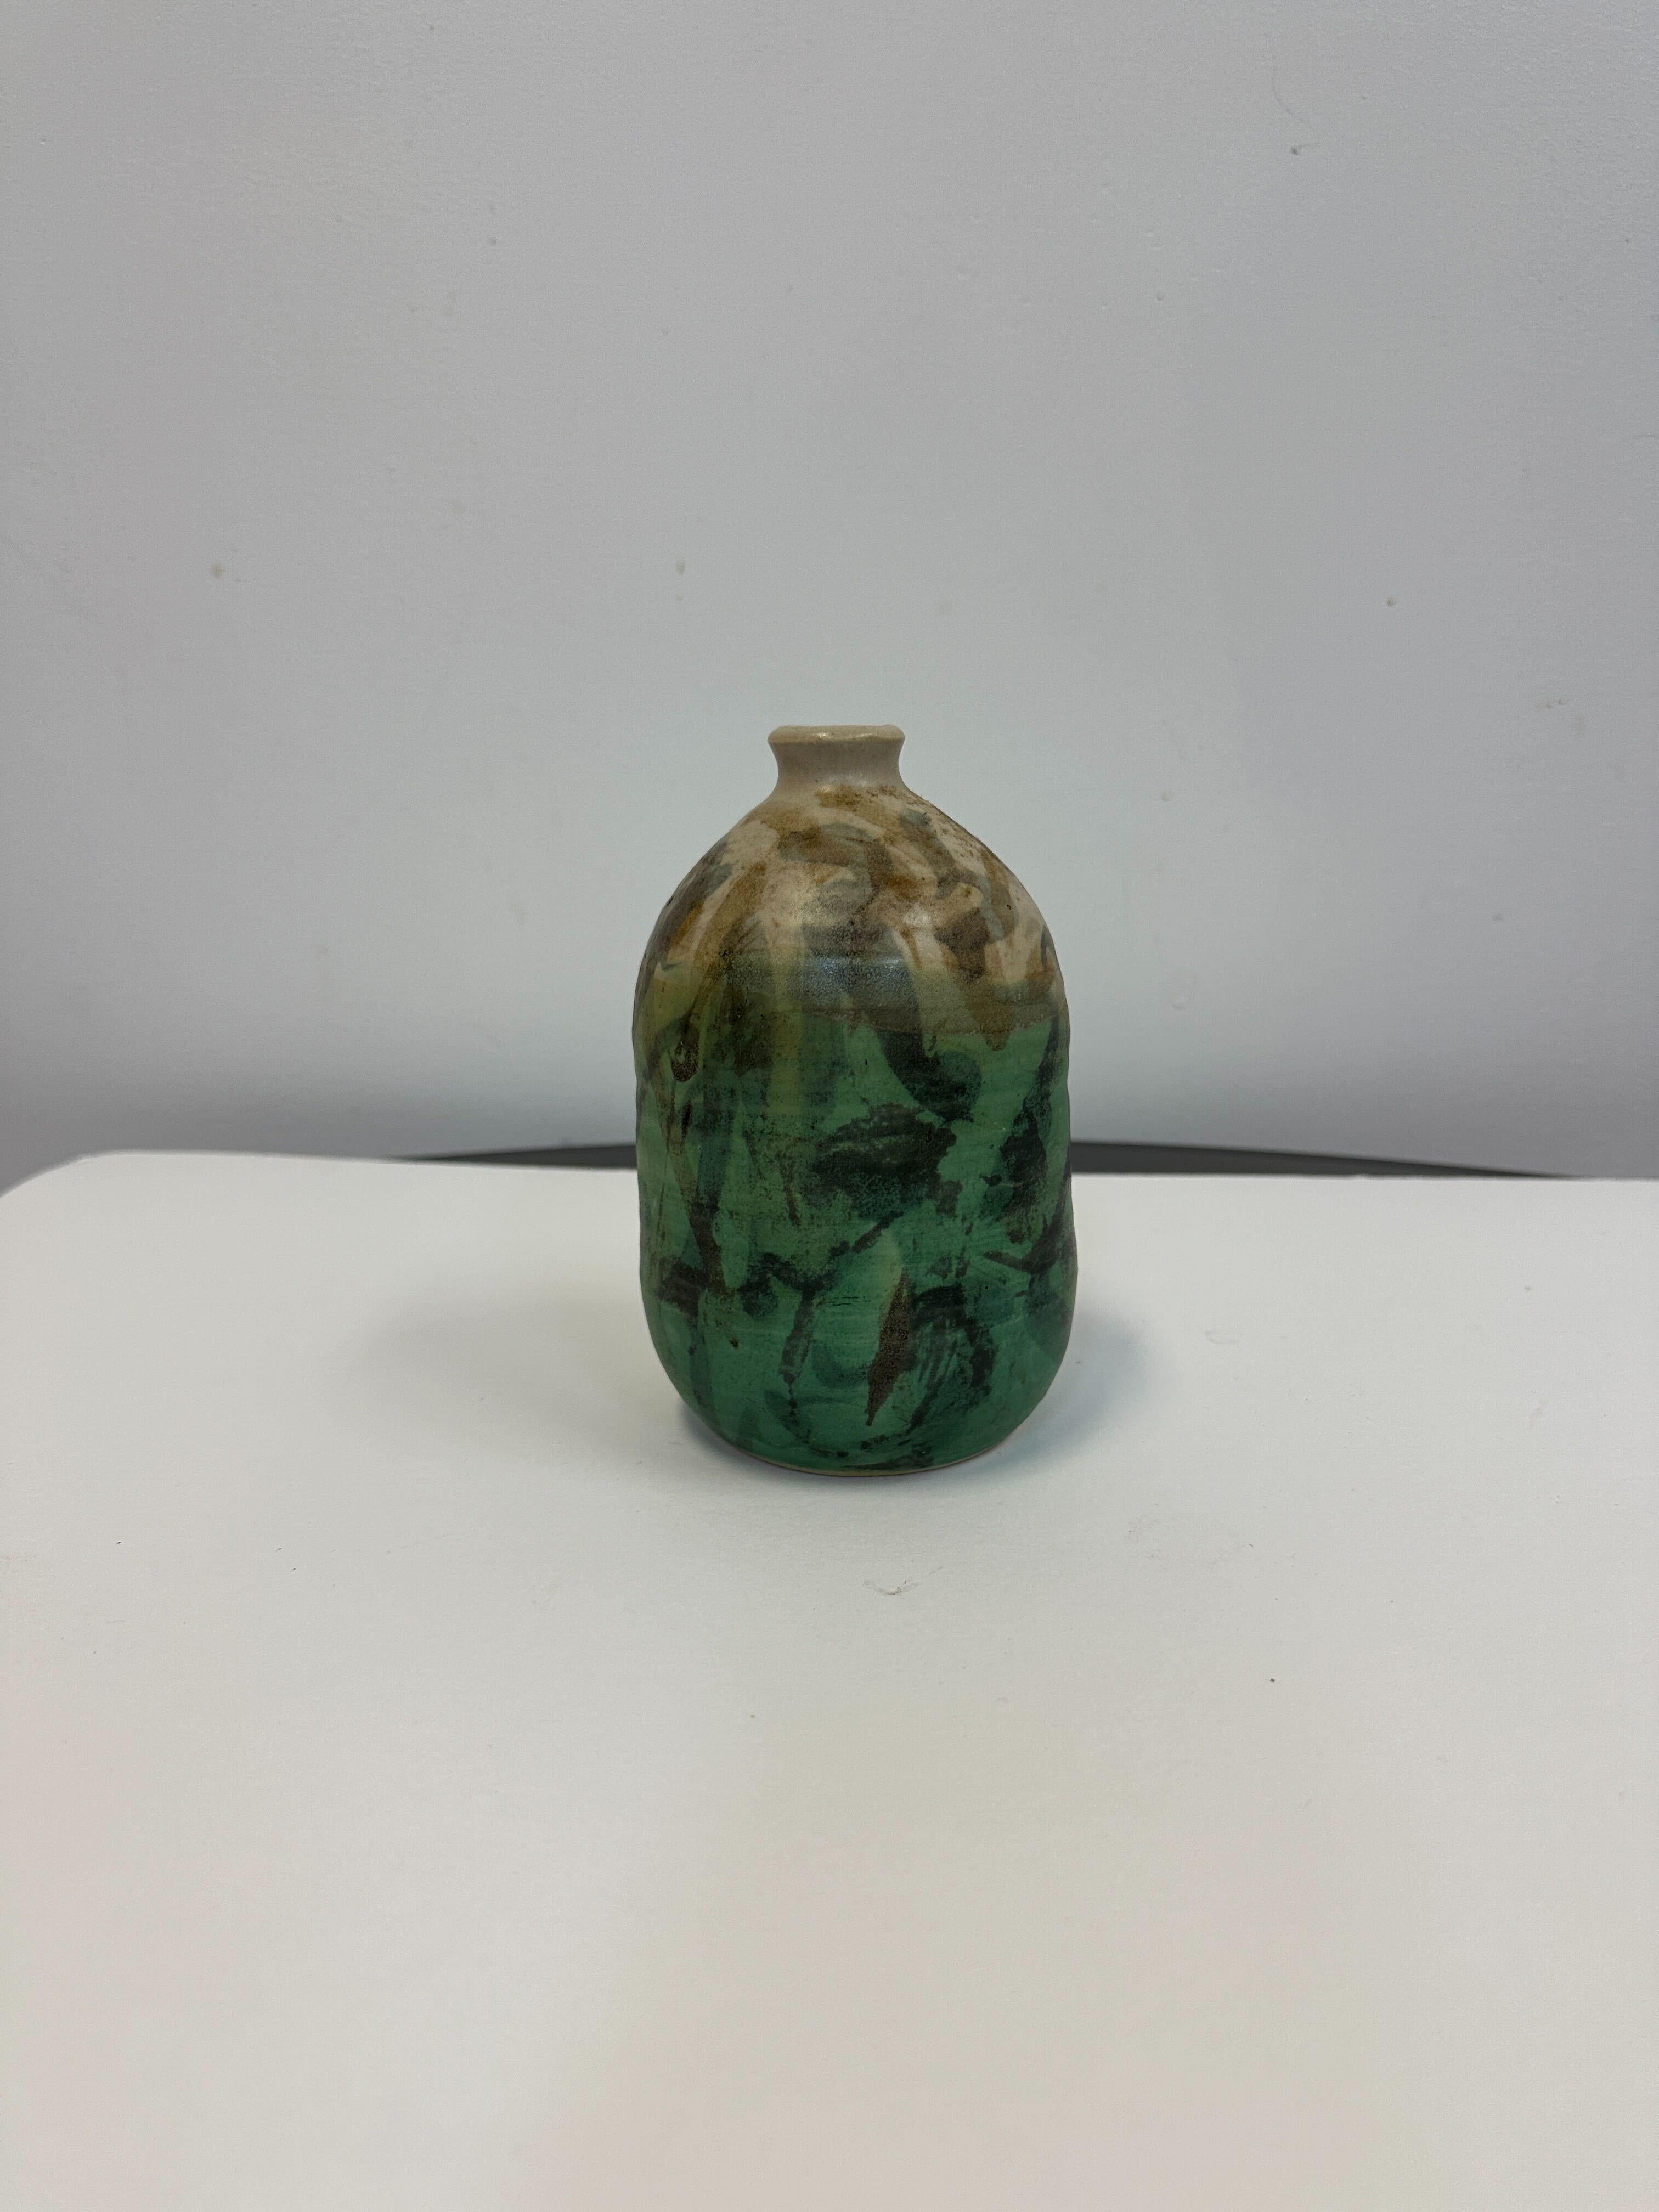 The beautiful ceramic vessel is in very good overall condition. Measuring 6